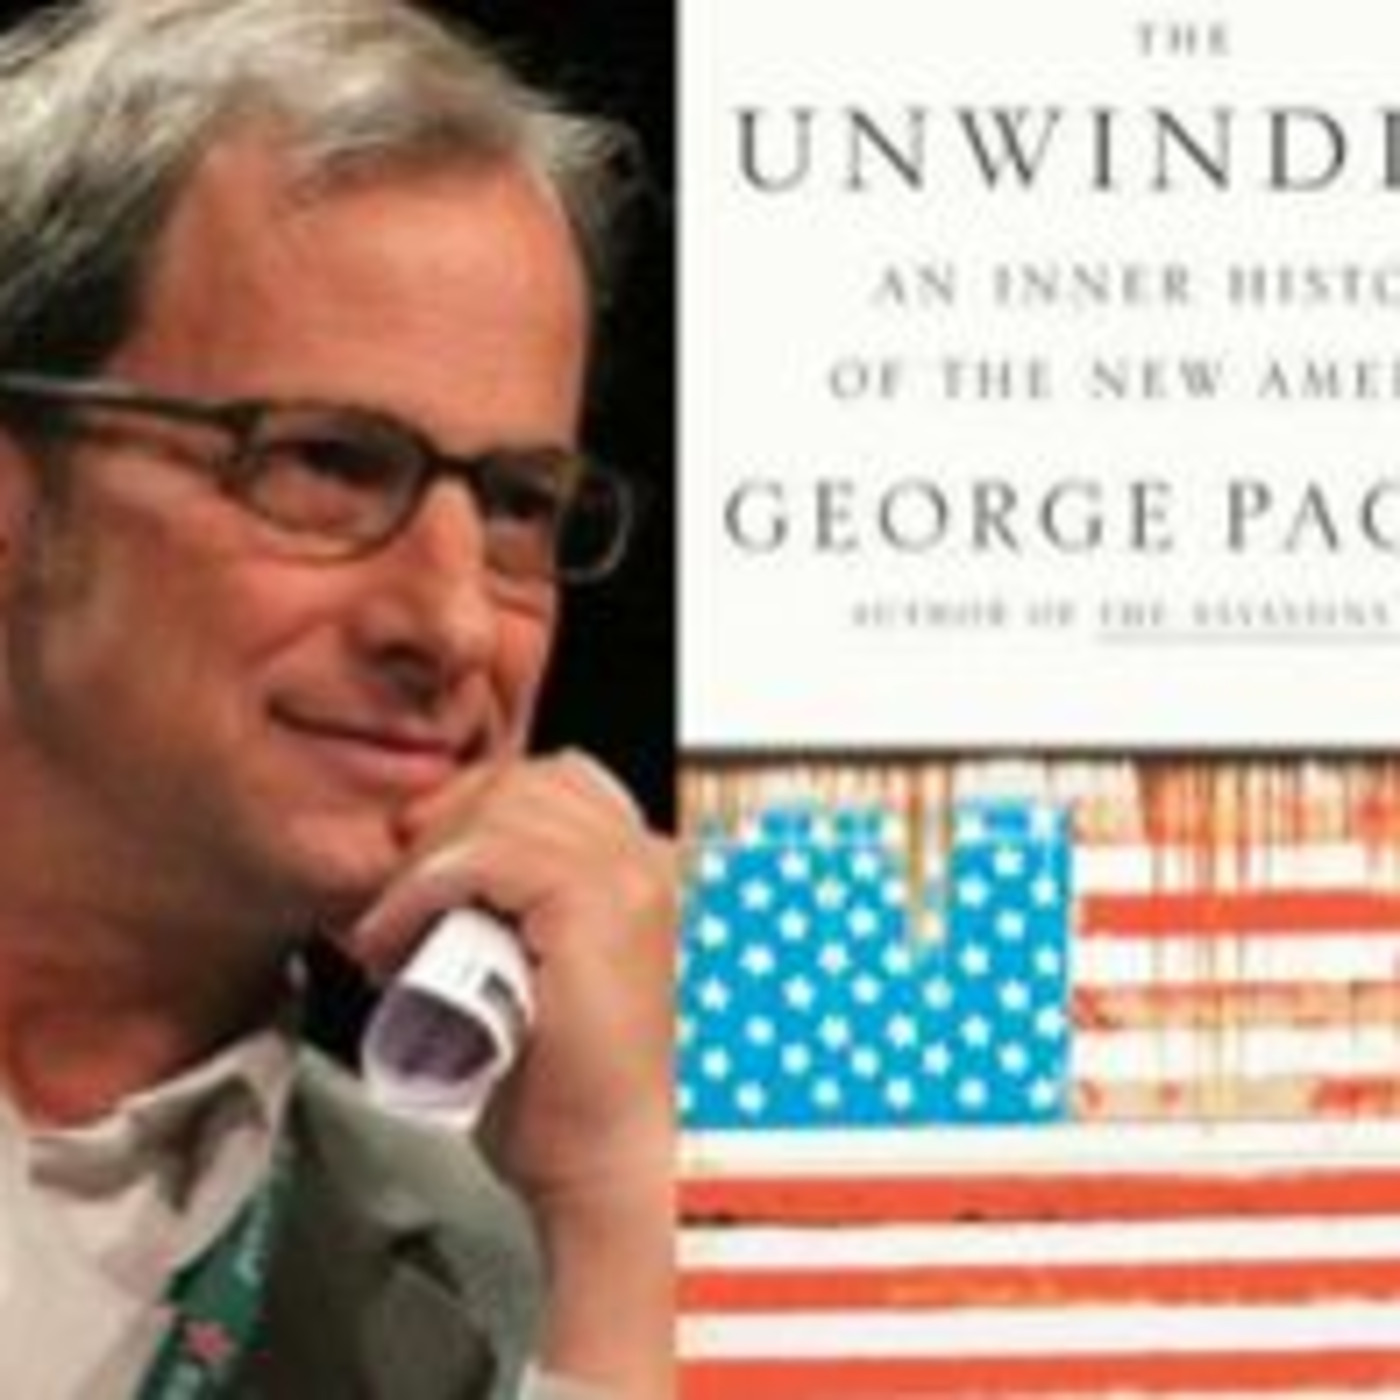 Free Forum Q&A - GEORGE PACKER, Author of The Unwinding: Inner History of New America, #8 Best-seller